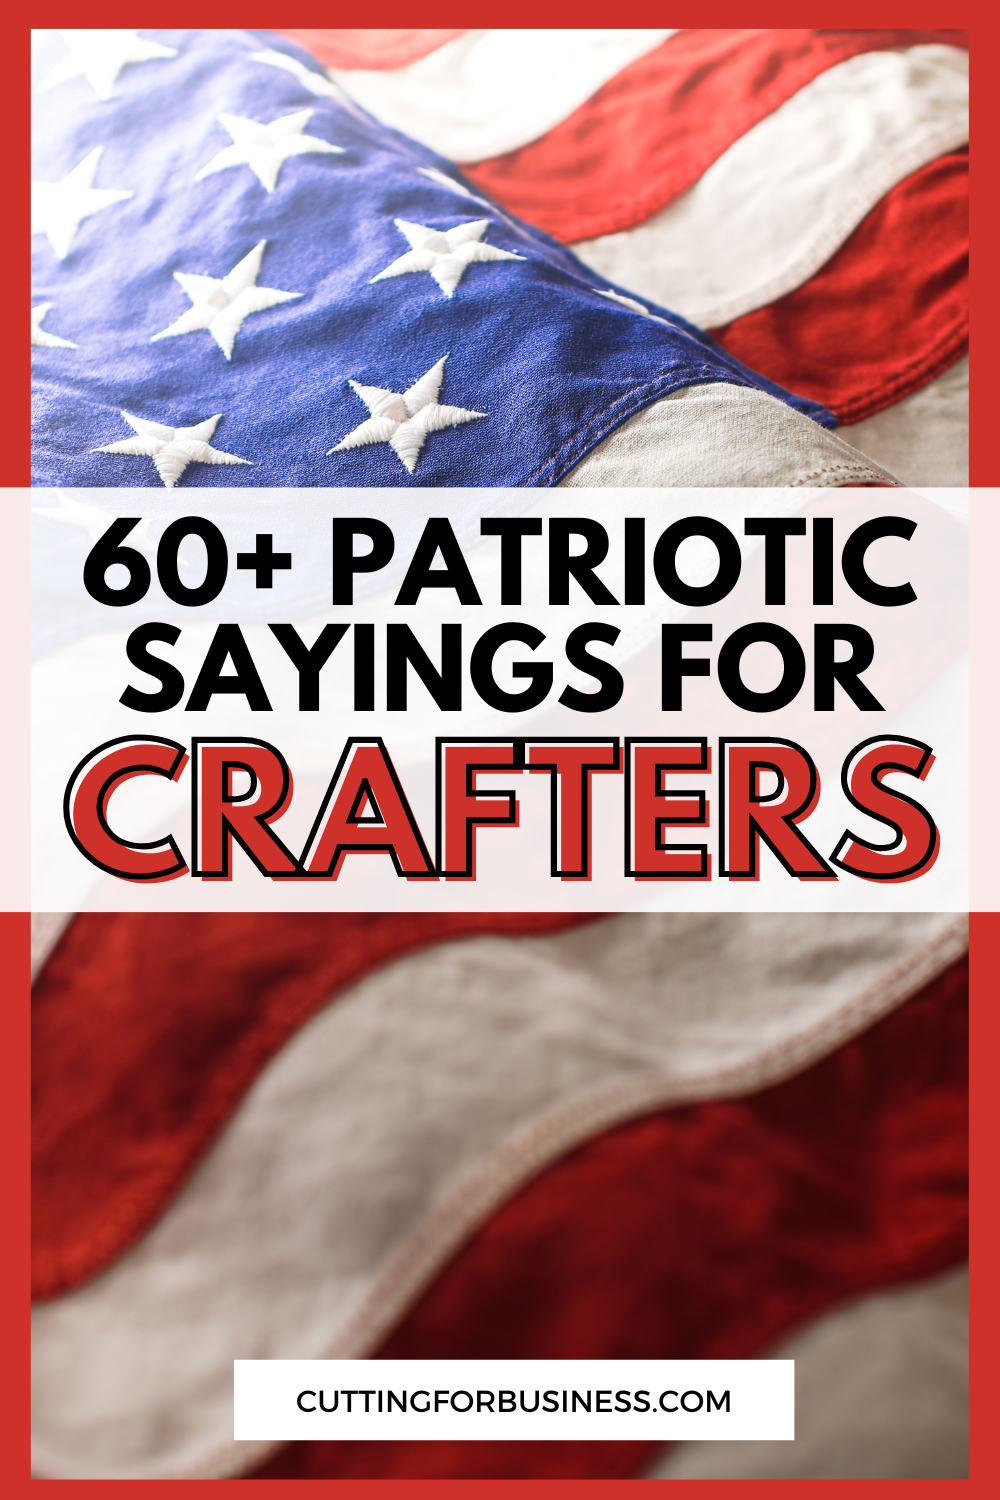 60+ Patriotic Sayings for Crafters - cuttingforbusiness.com